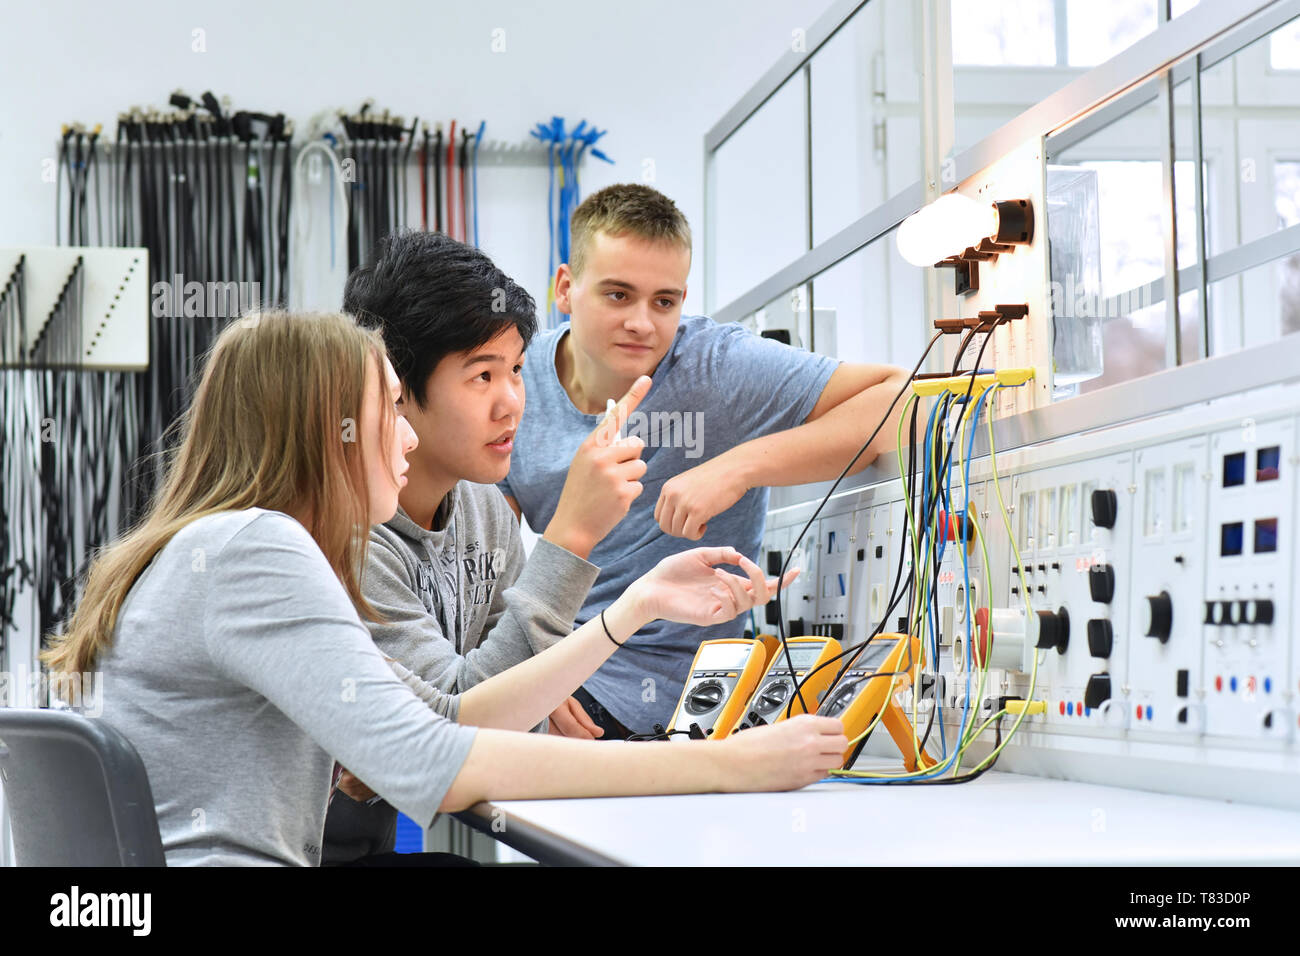 group of young students in vocational education and training for electronics Stock Photo